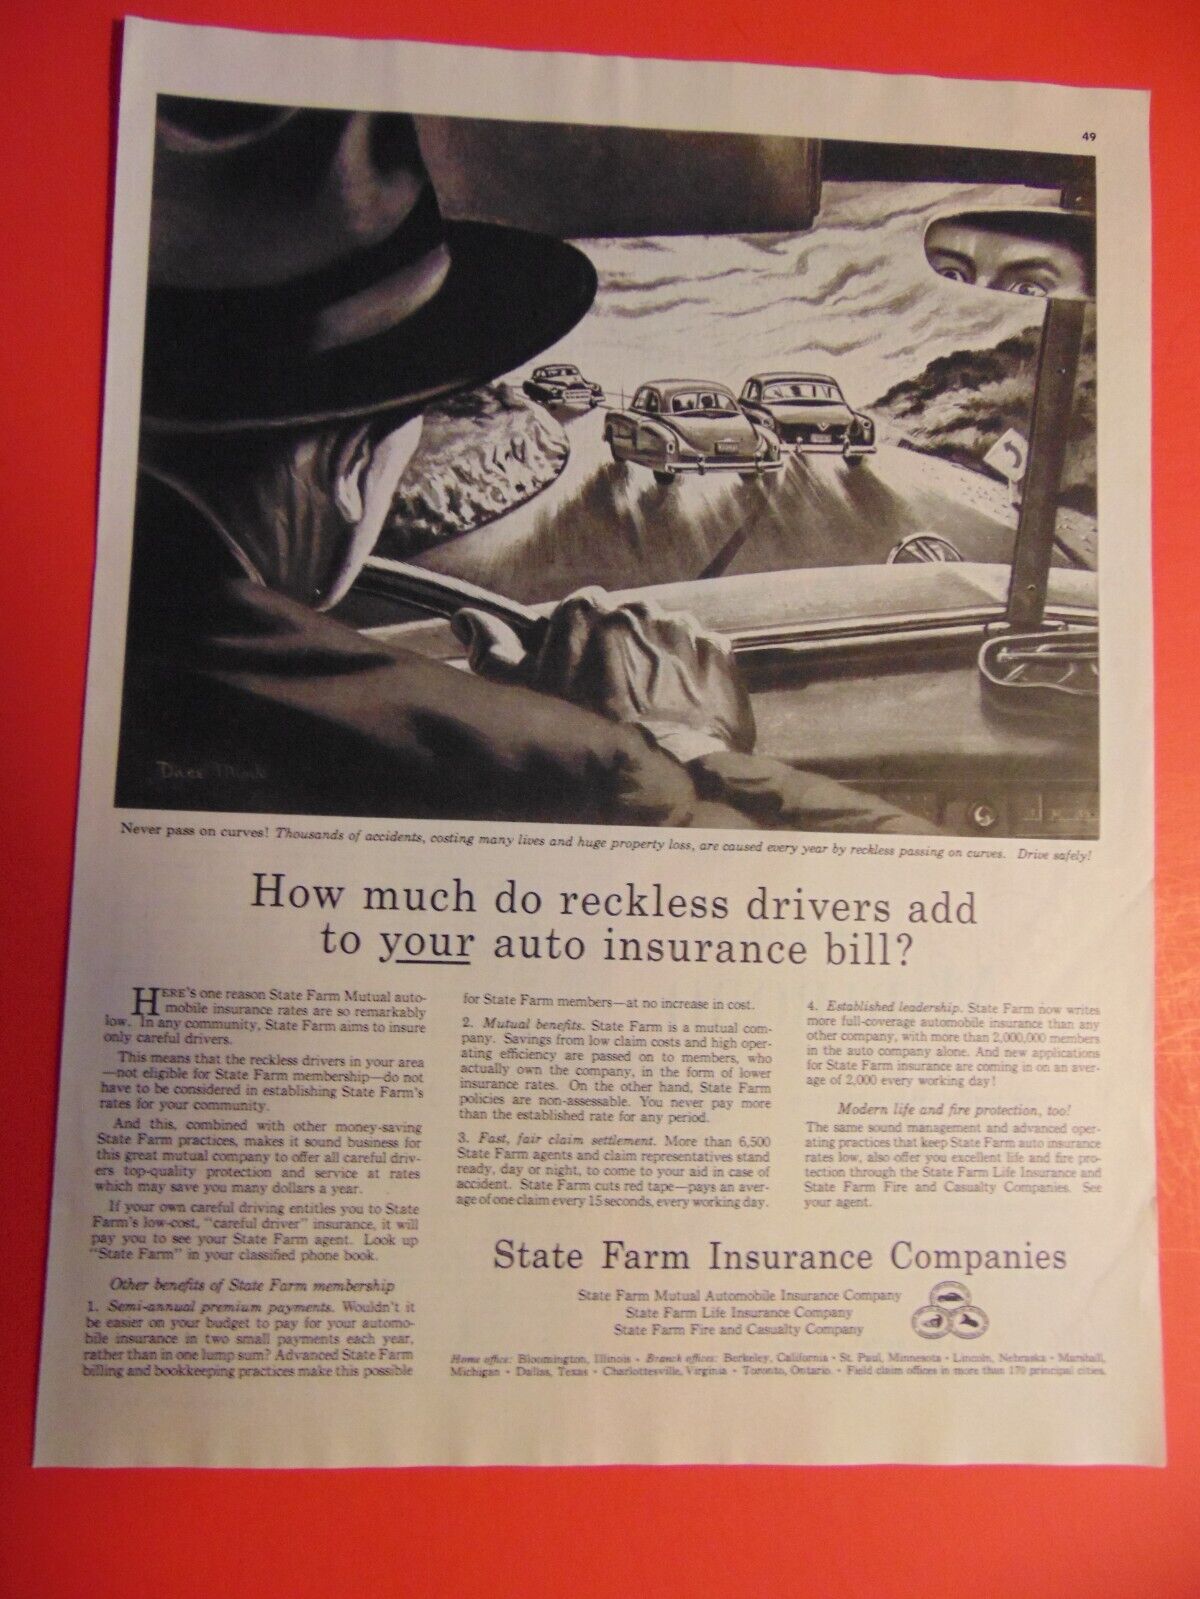 1952 STATE FARM INSURANCE CO. Reckless Drivers photo art print ad